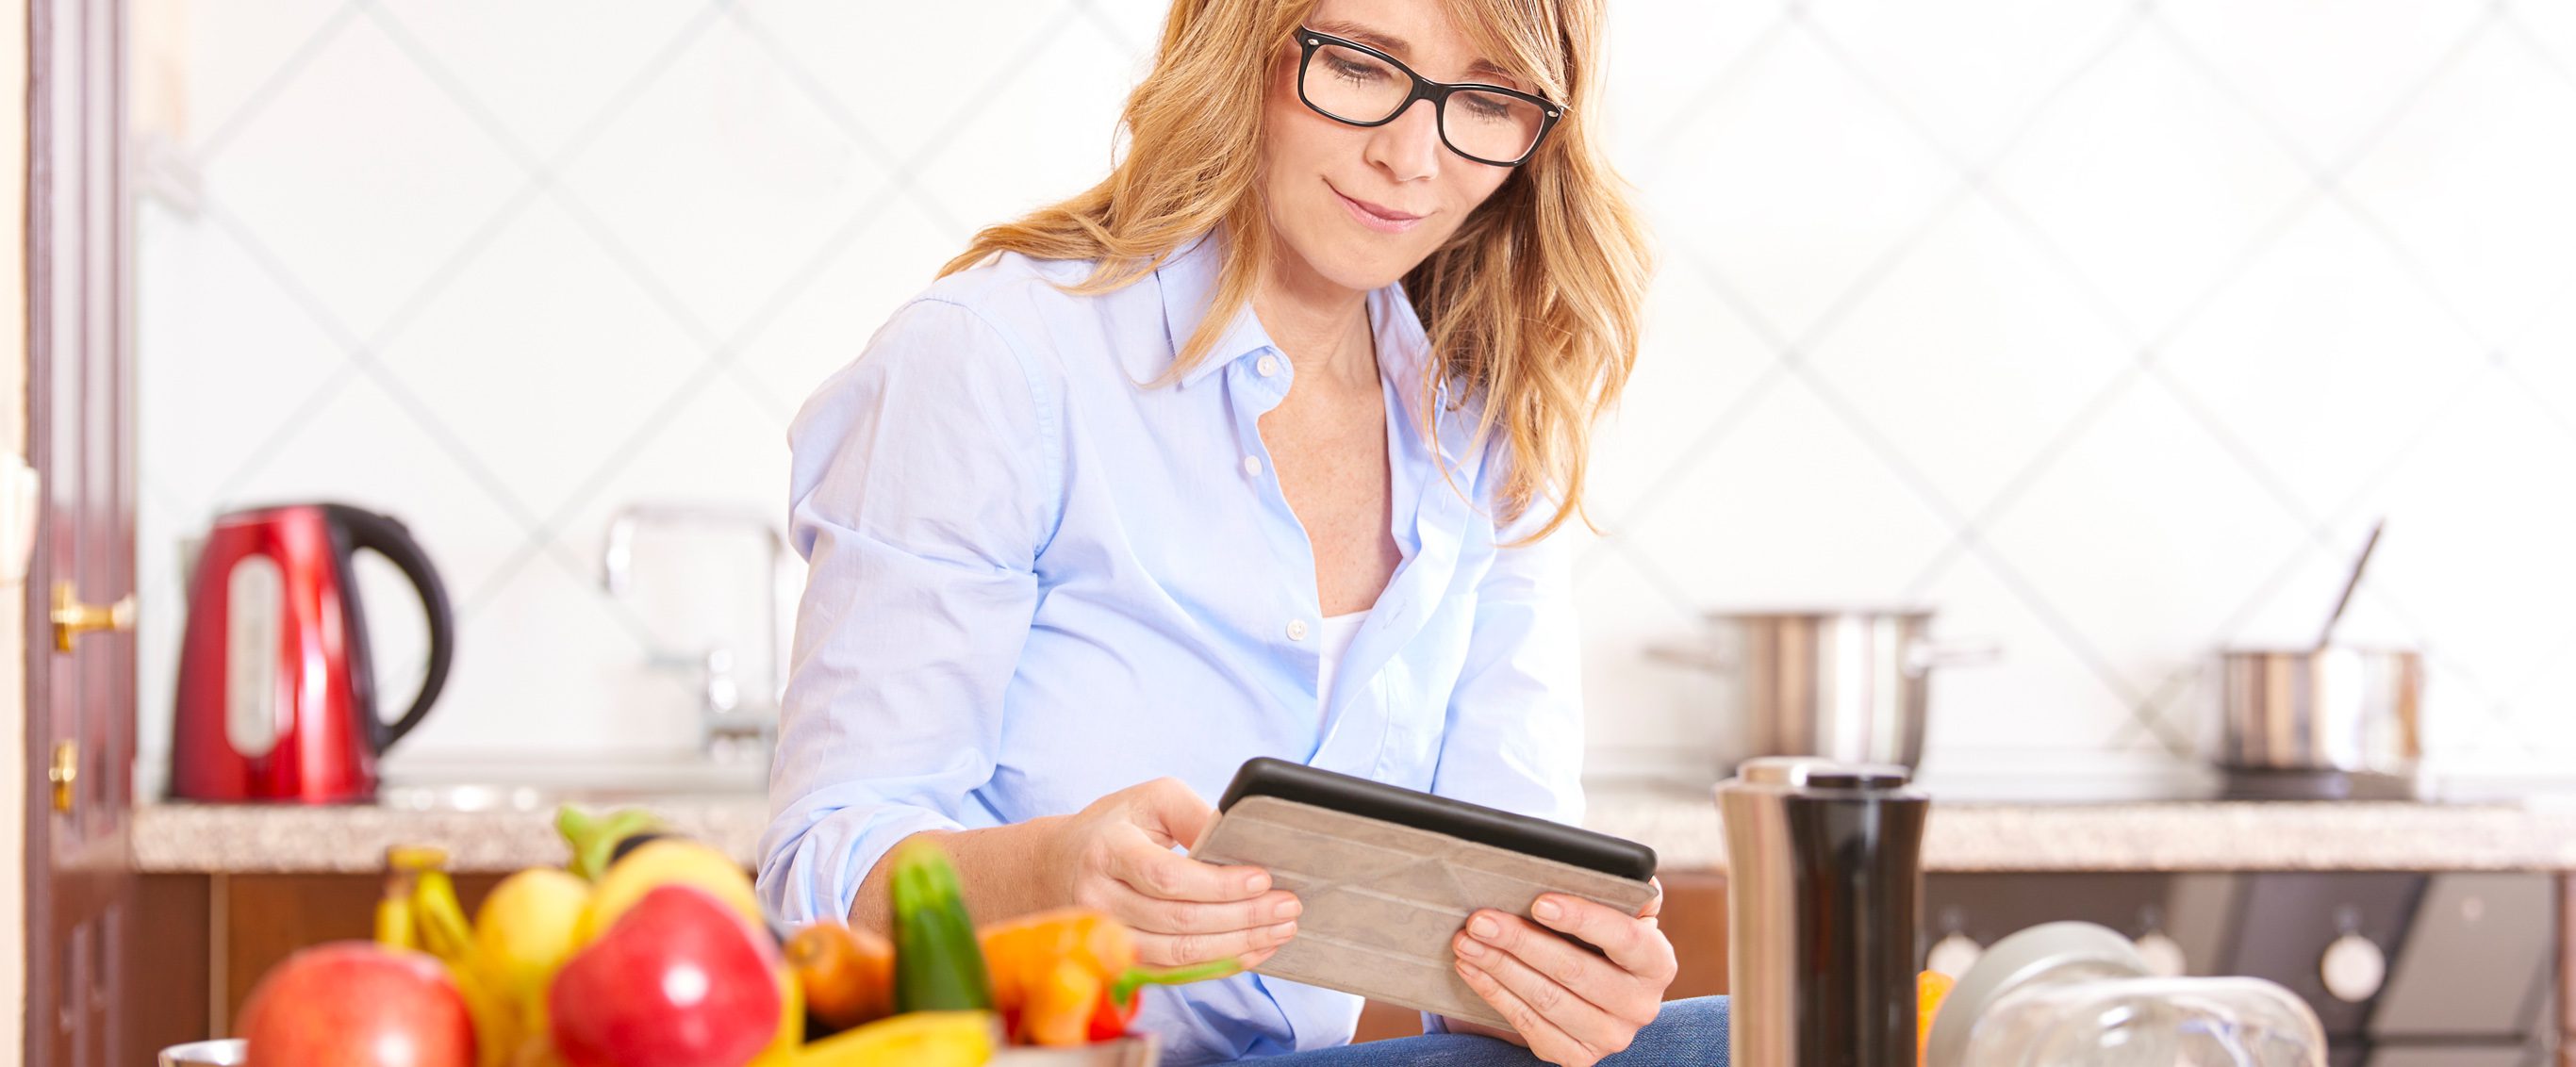 Woman Reading Tablet in Kitchen With Vegetables